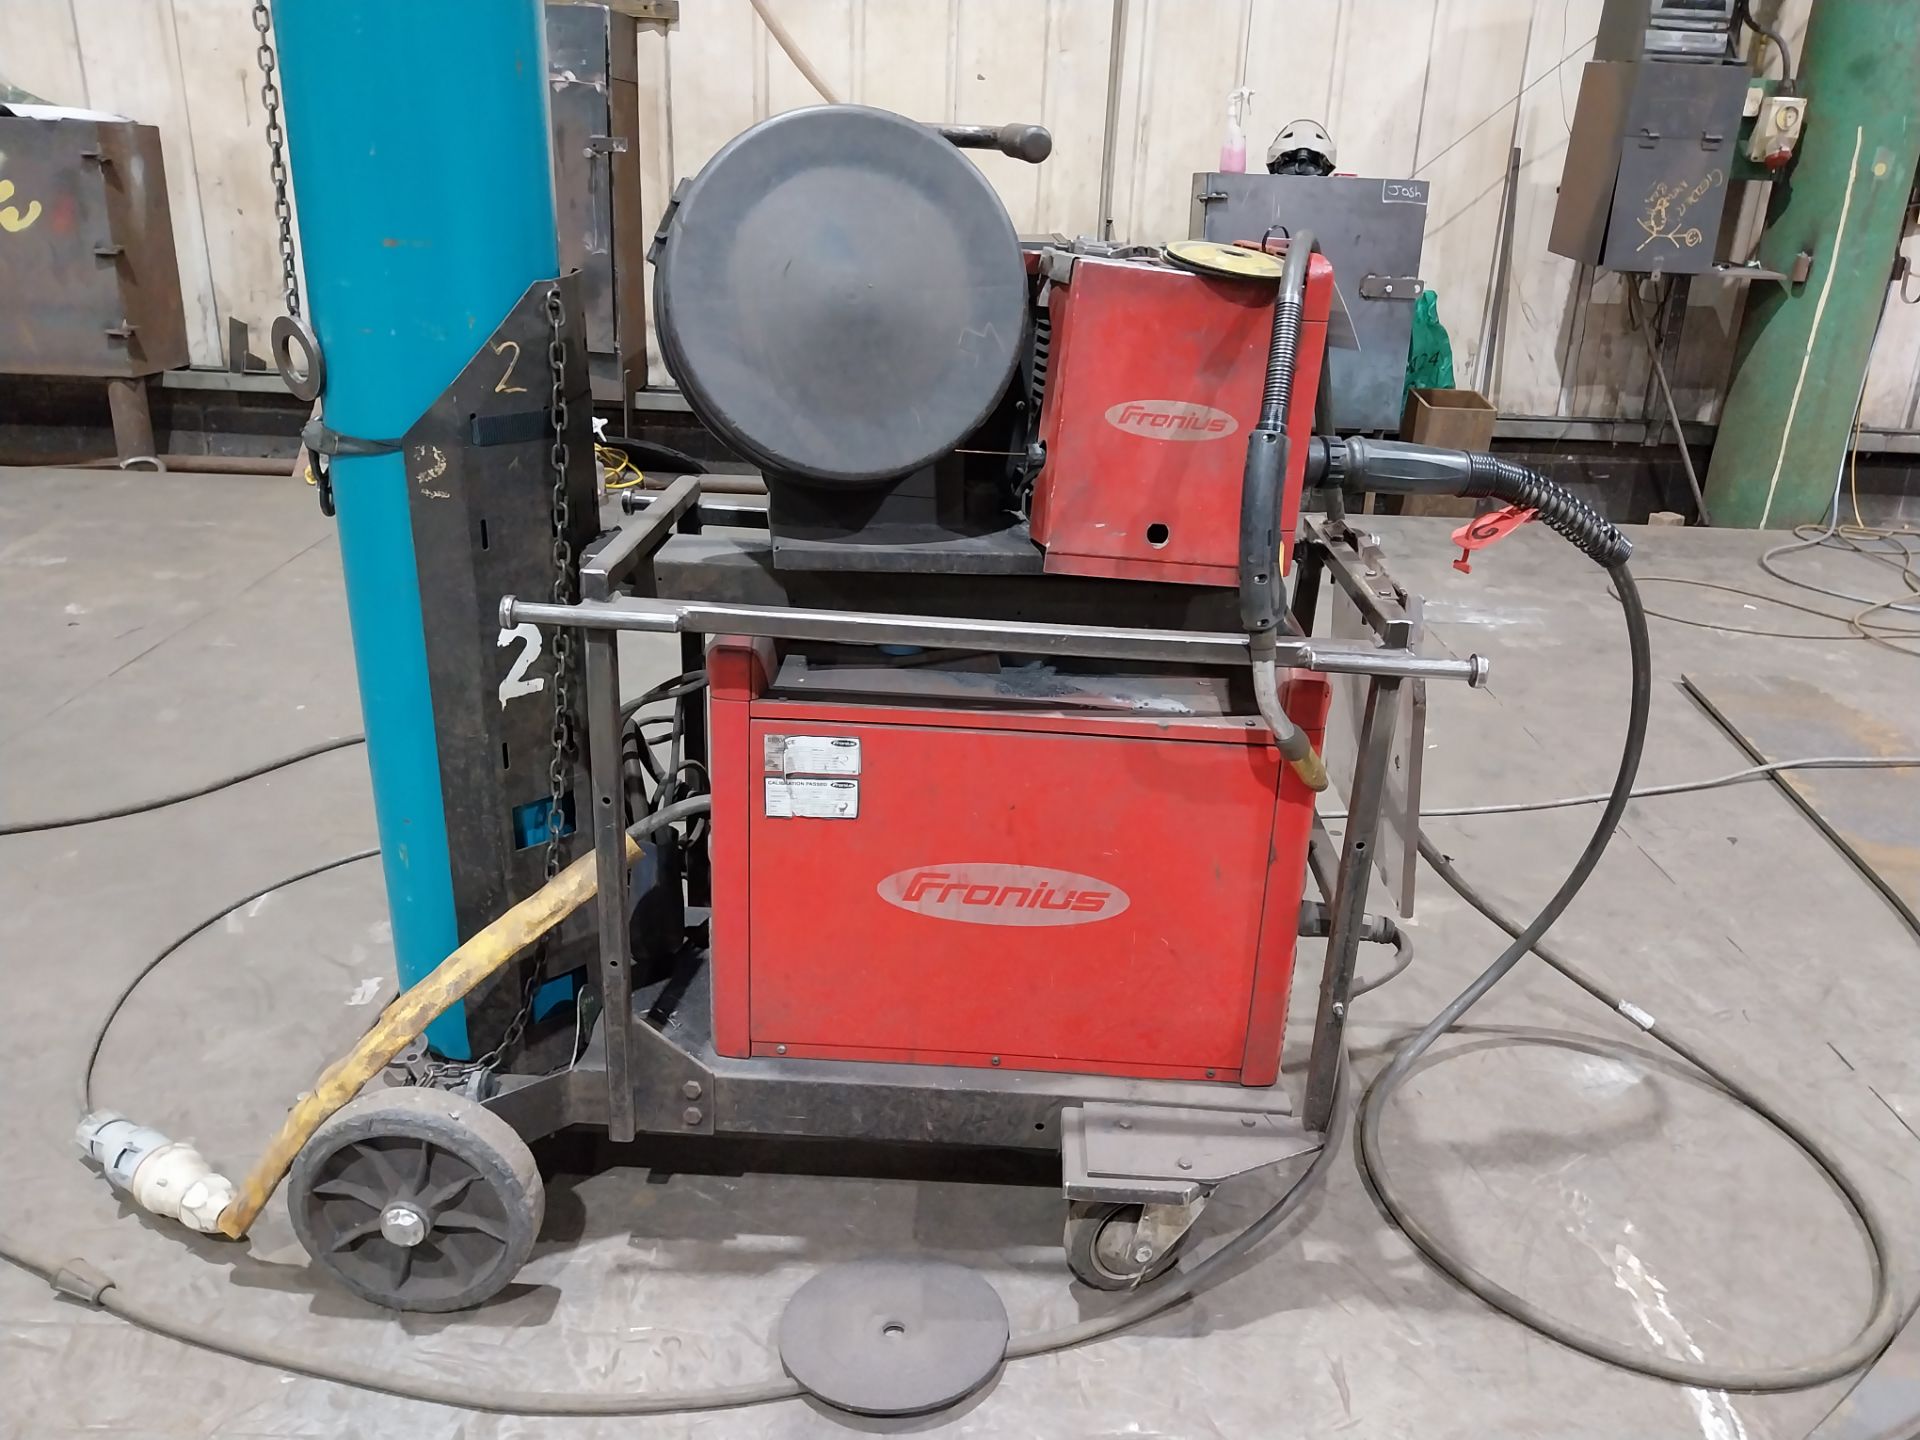 Fronius VR4000 4R/G/W/E mig welder with wire feed (bottle not included) - Image 5 of 7